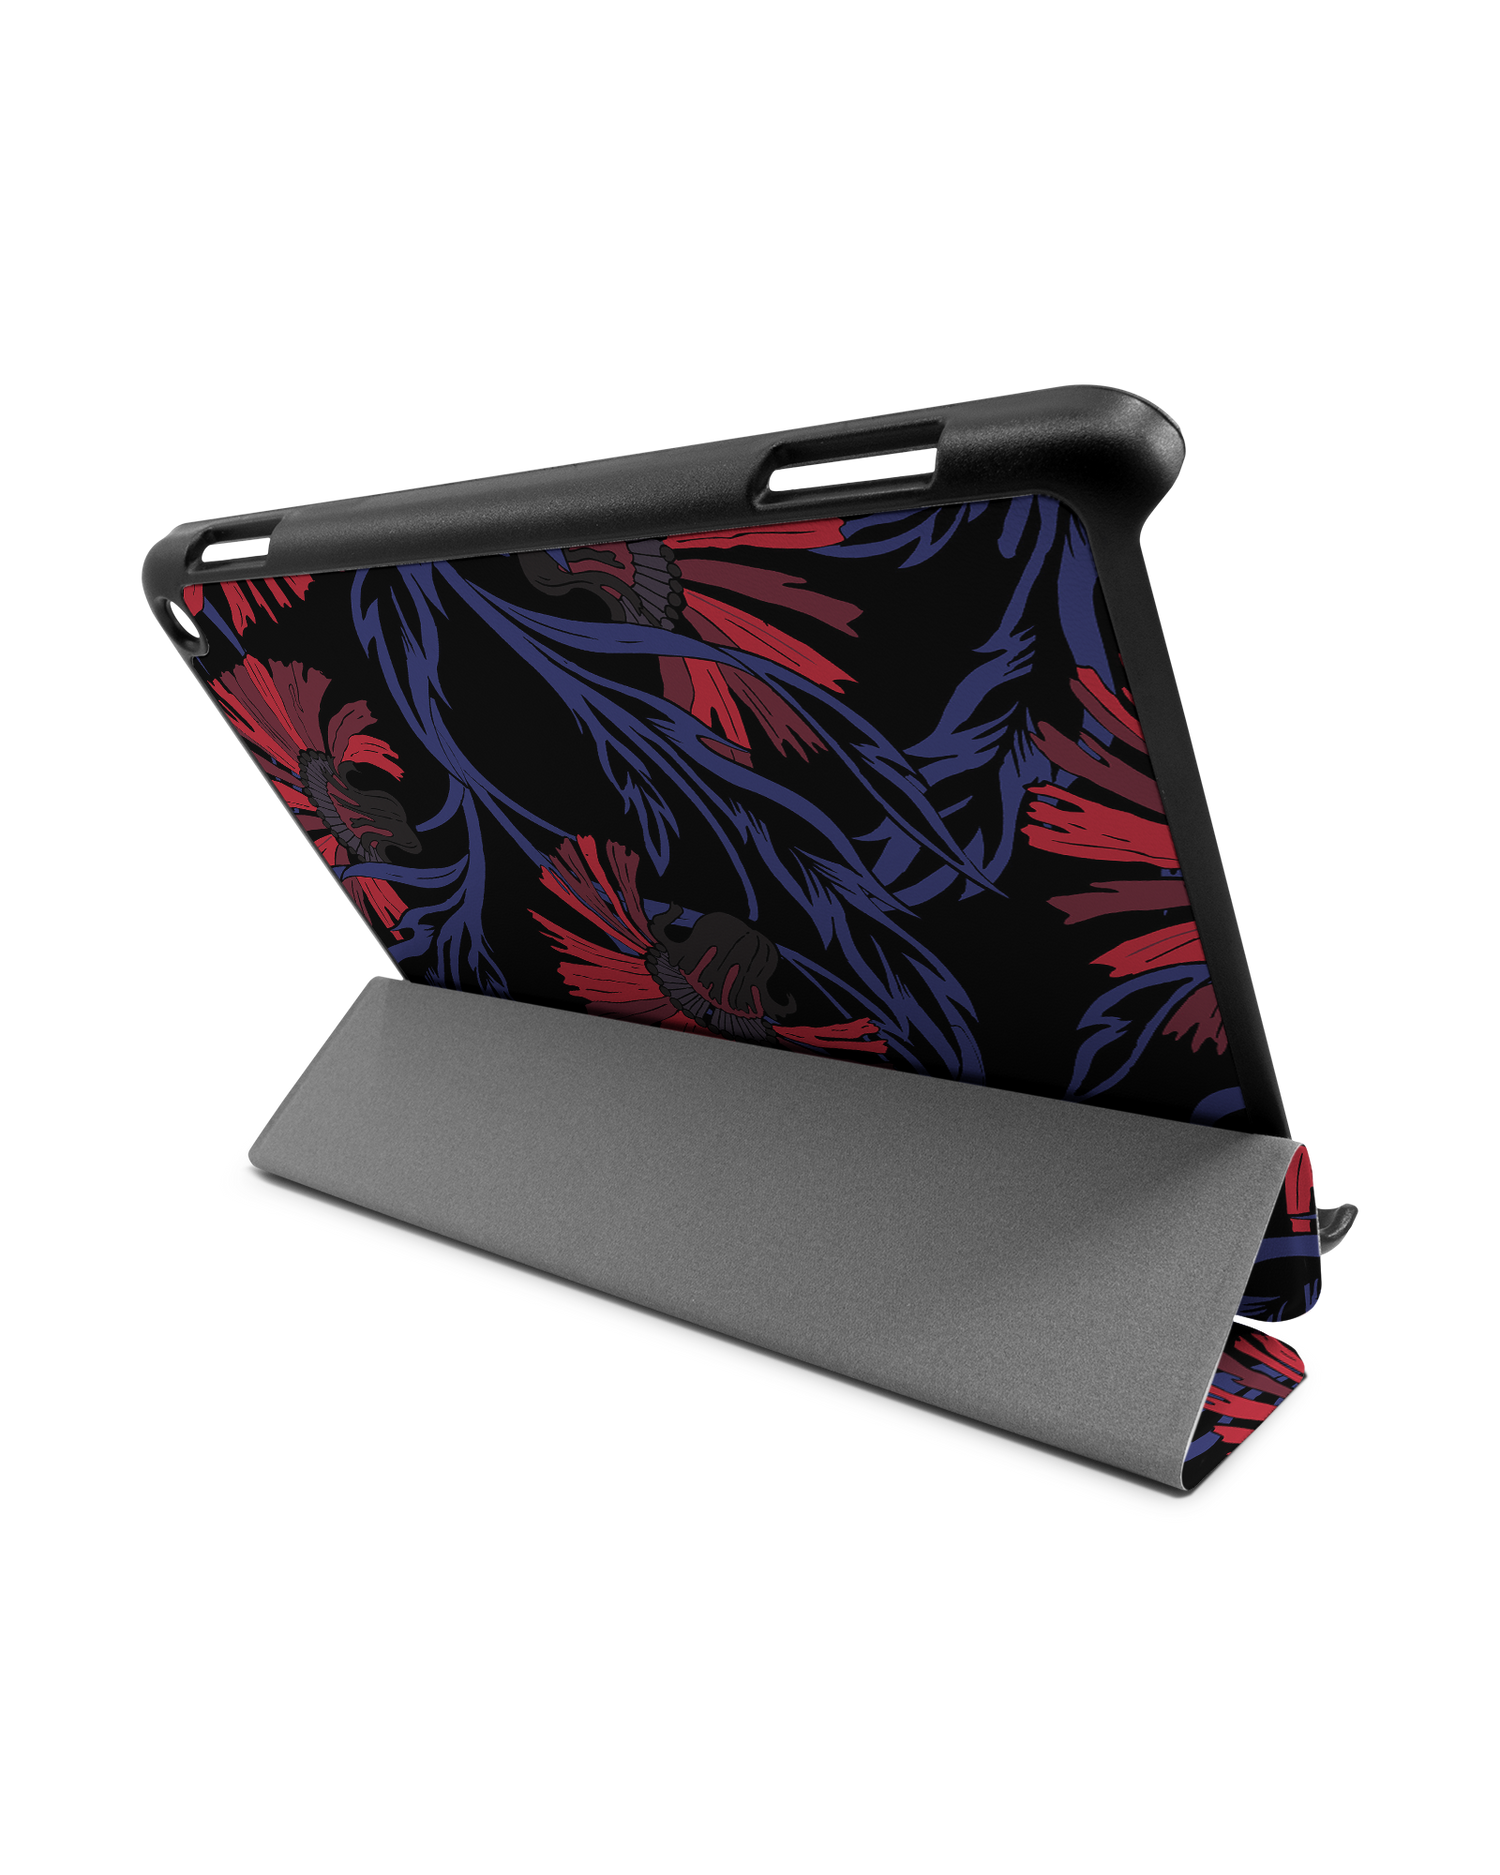 Midnight Floral Tablet Smart Case for Amazon Fire HD 8 (2022), Amazon Fire HD 8 Plus (2022), Amazon Fire HD 8 (2020), Amazon Fire HD 8 Plus (2020): Used as Stand